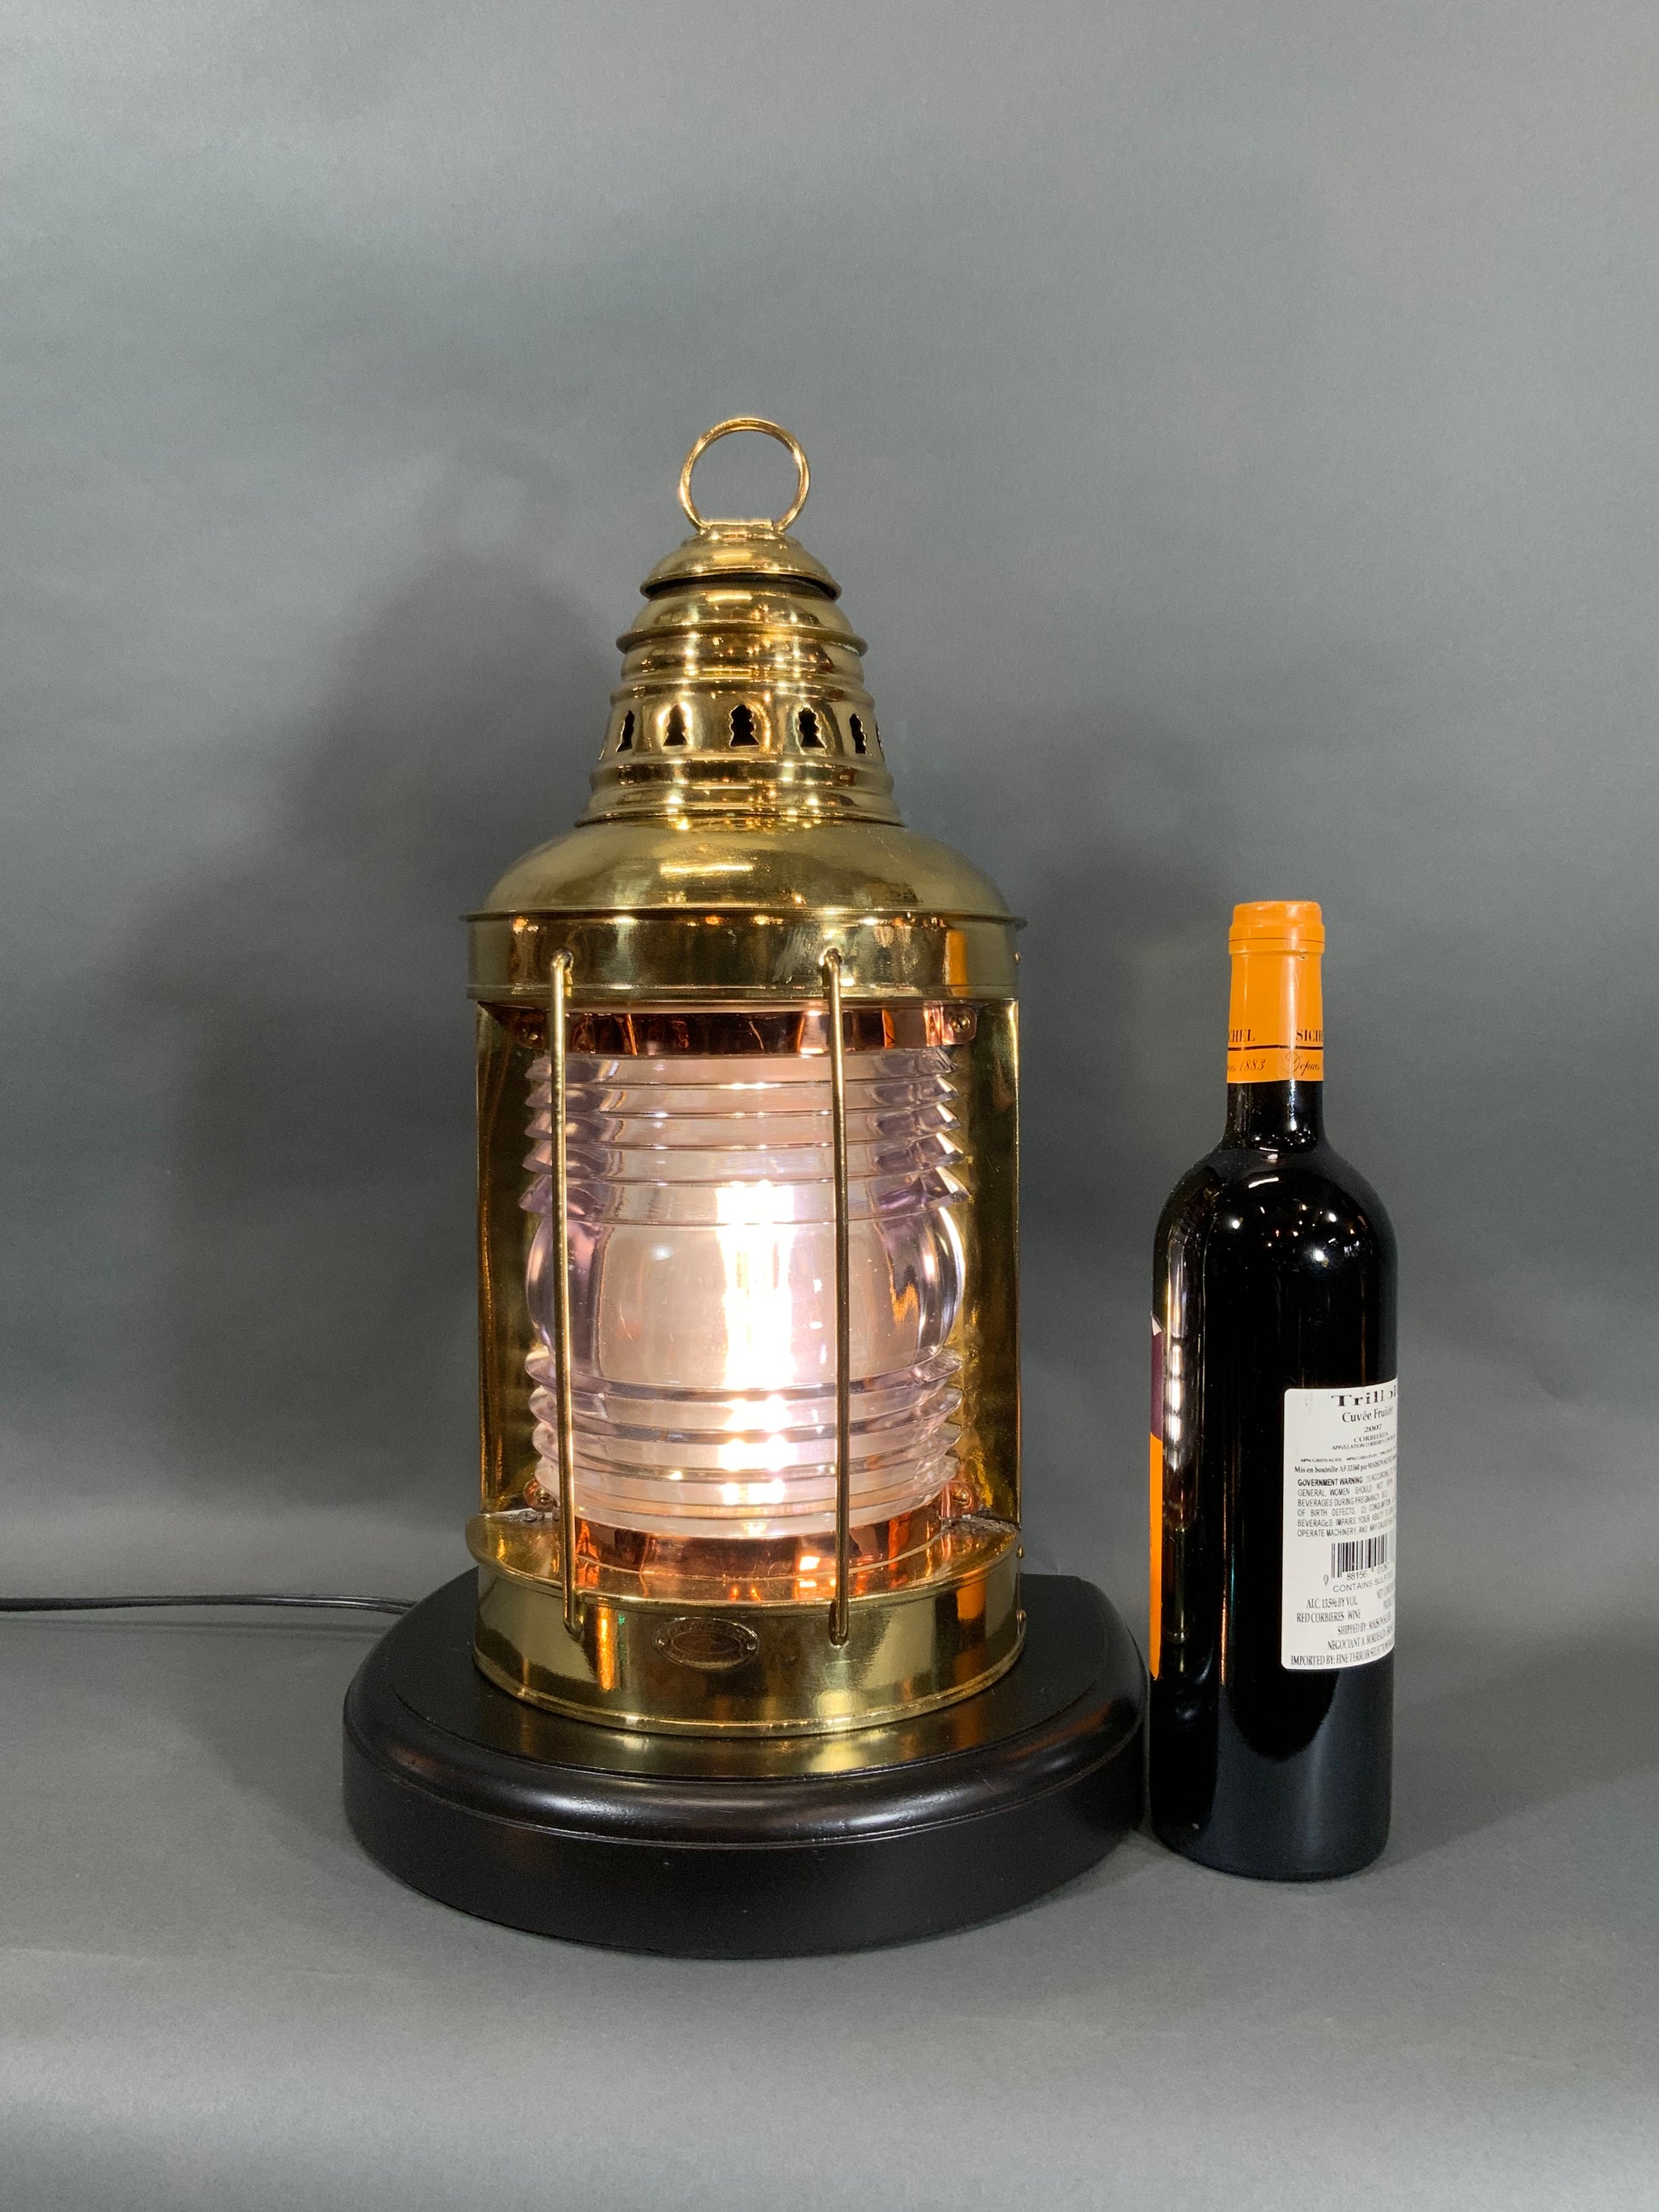 F.H. Lovell Co. Solid Brass Ships Lantern with Fresnel Glass Lens - Lannan Gallery